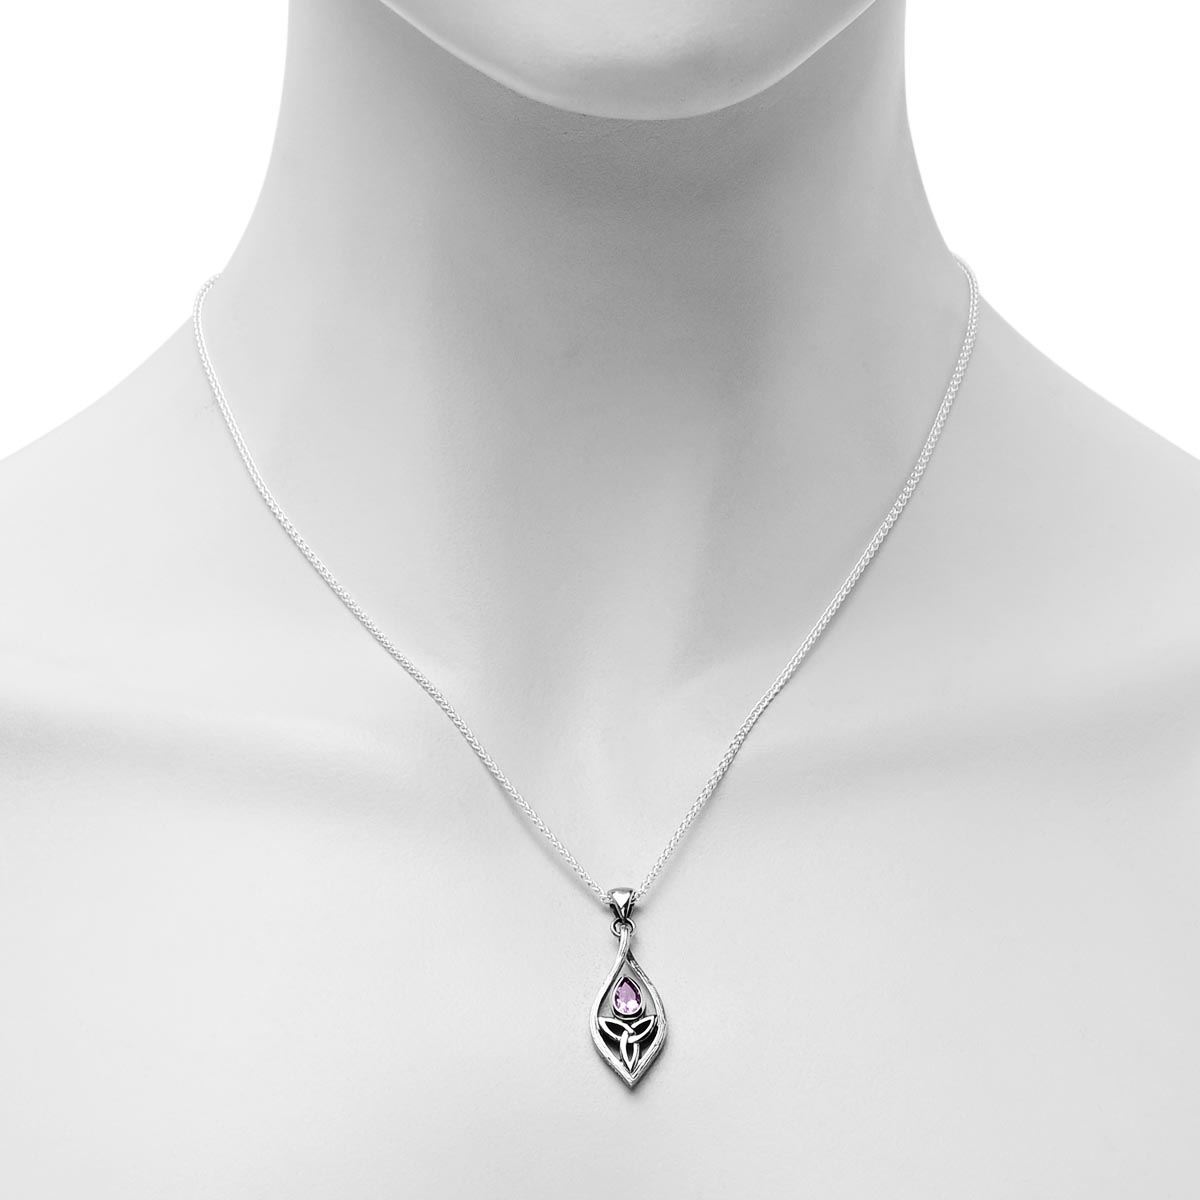 Keith Jack Amethyst Guardian Angel Necklace in Sterling Silver and 10kt Yellow Gold